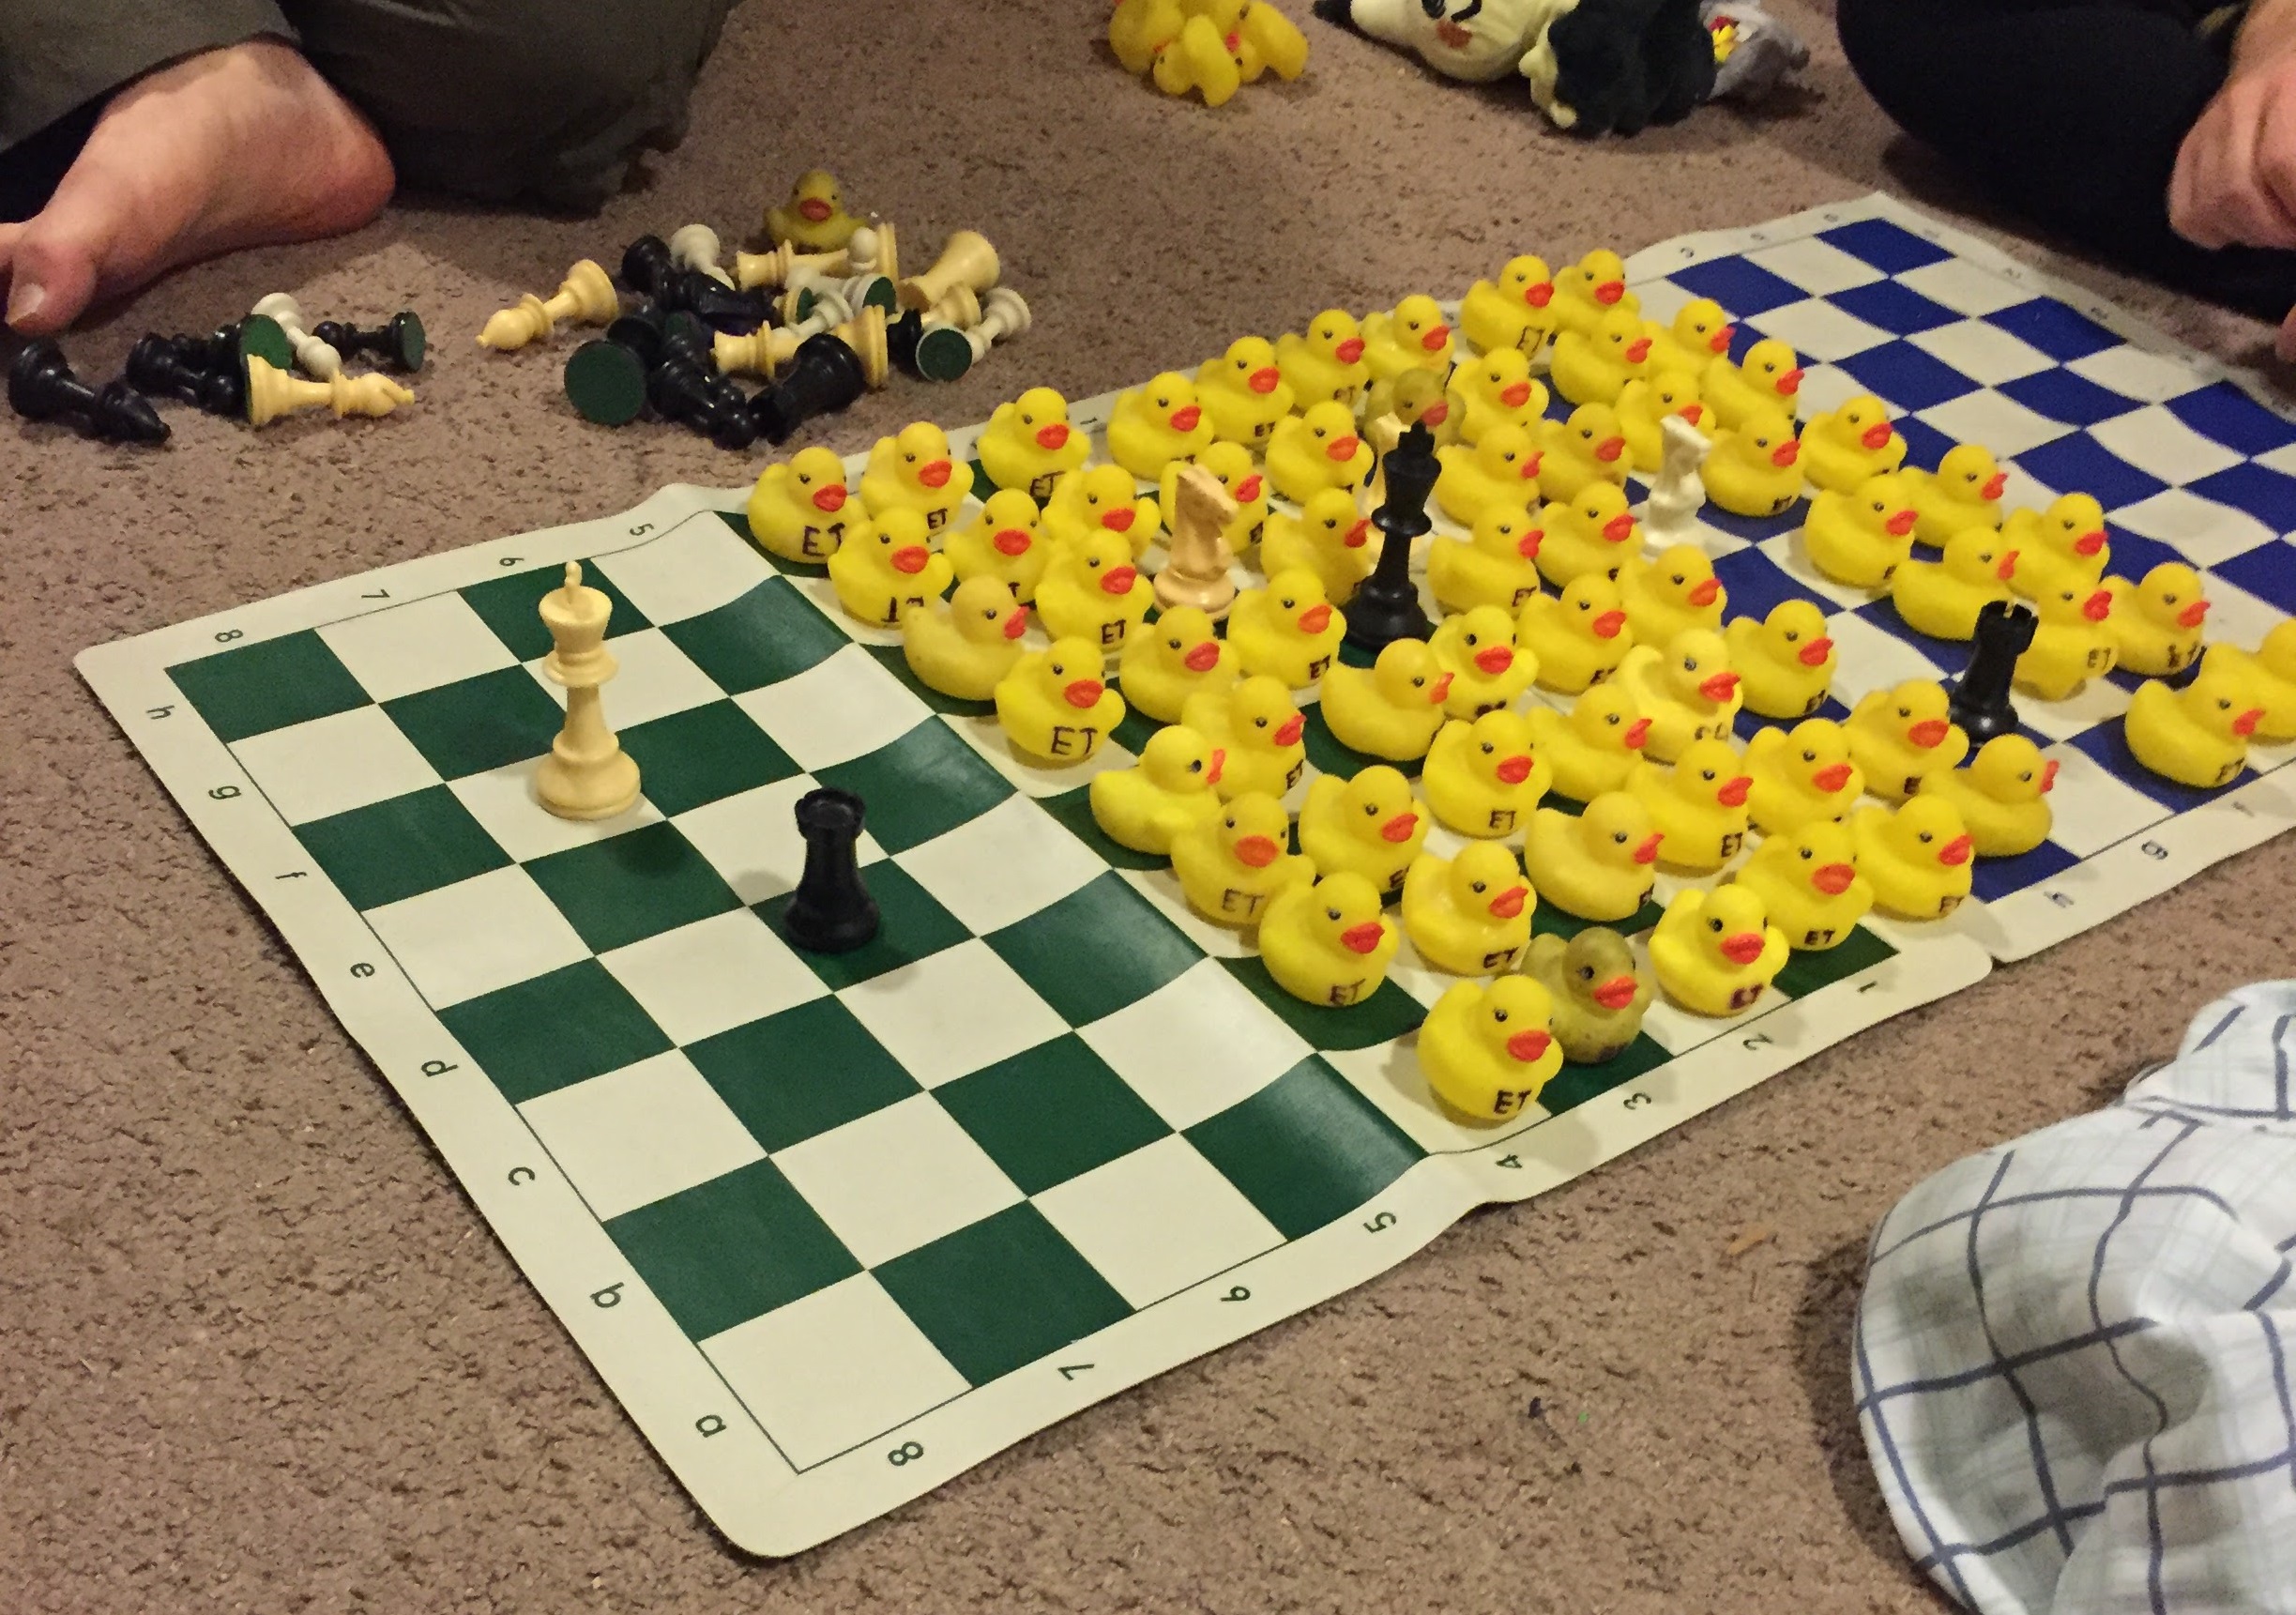 A chess board full of rubber ducks